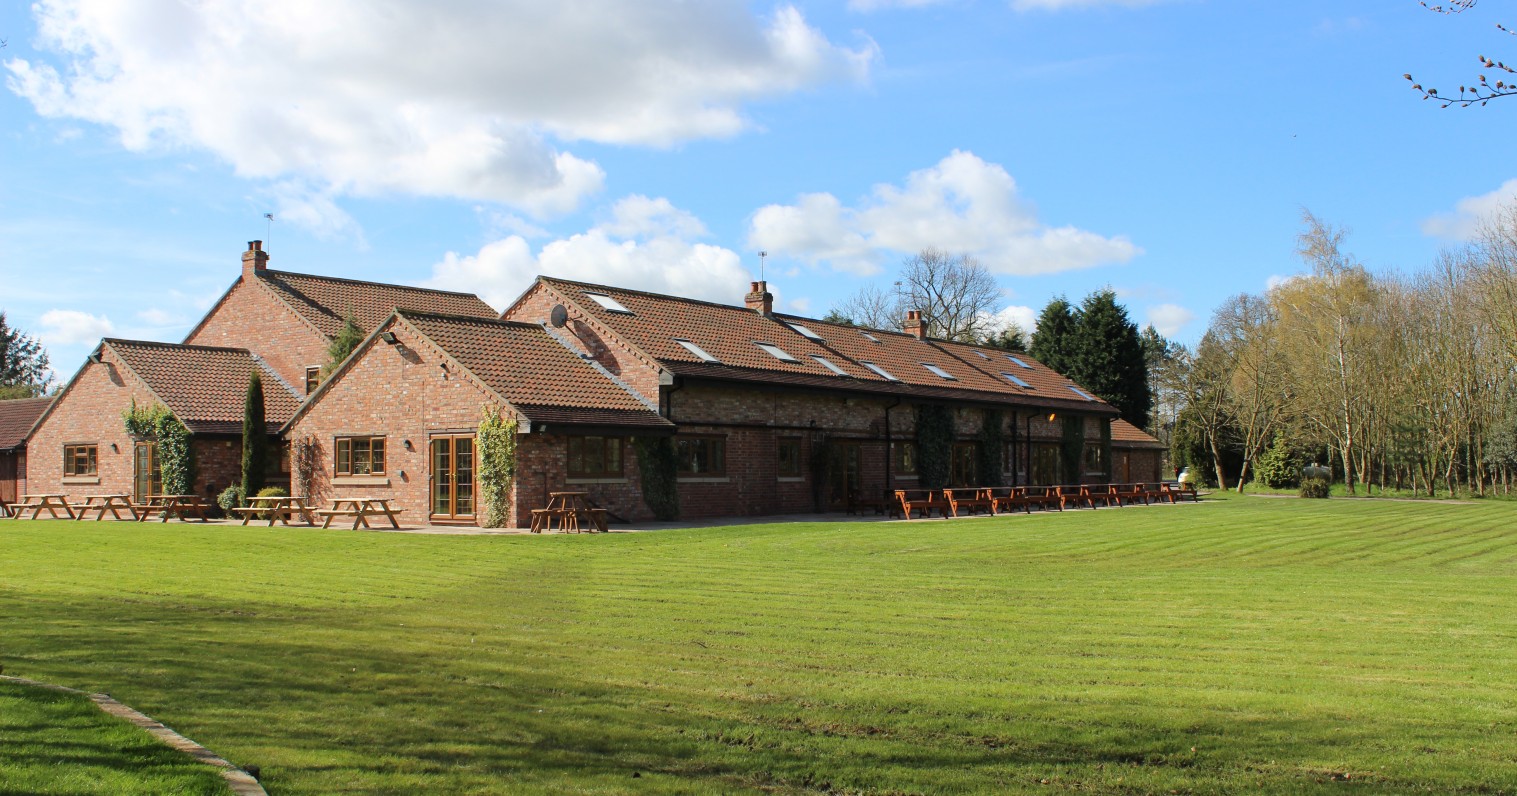 Villa Farm York Luxury Self Catered Holiday Cottages And Wedding